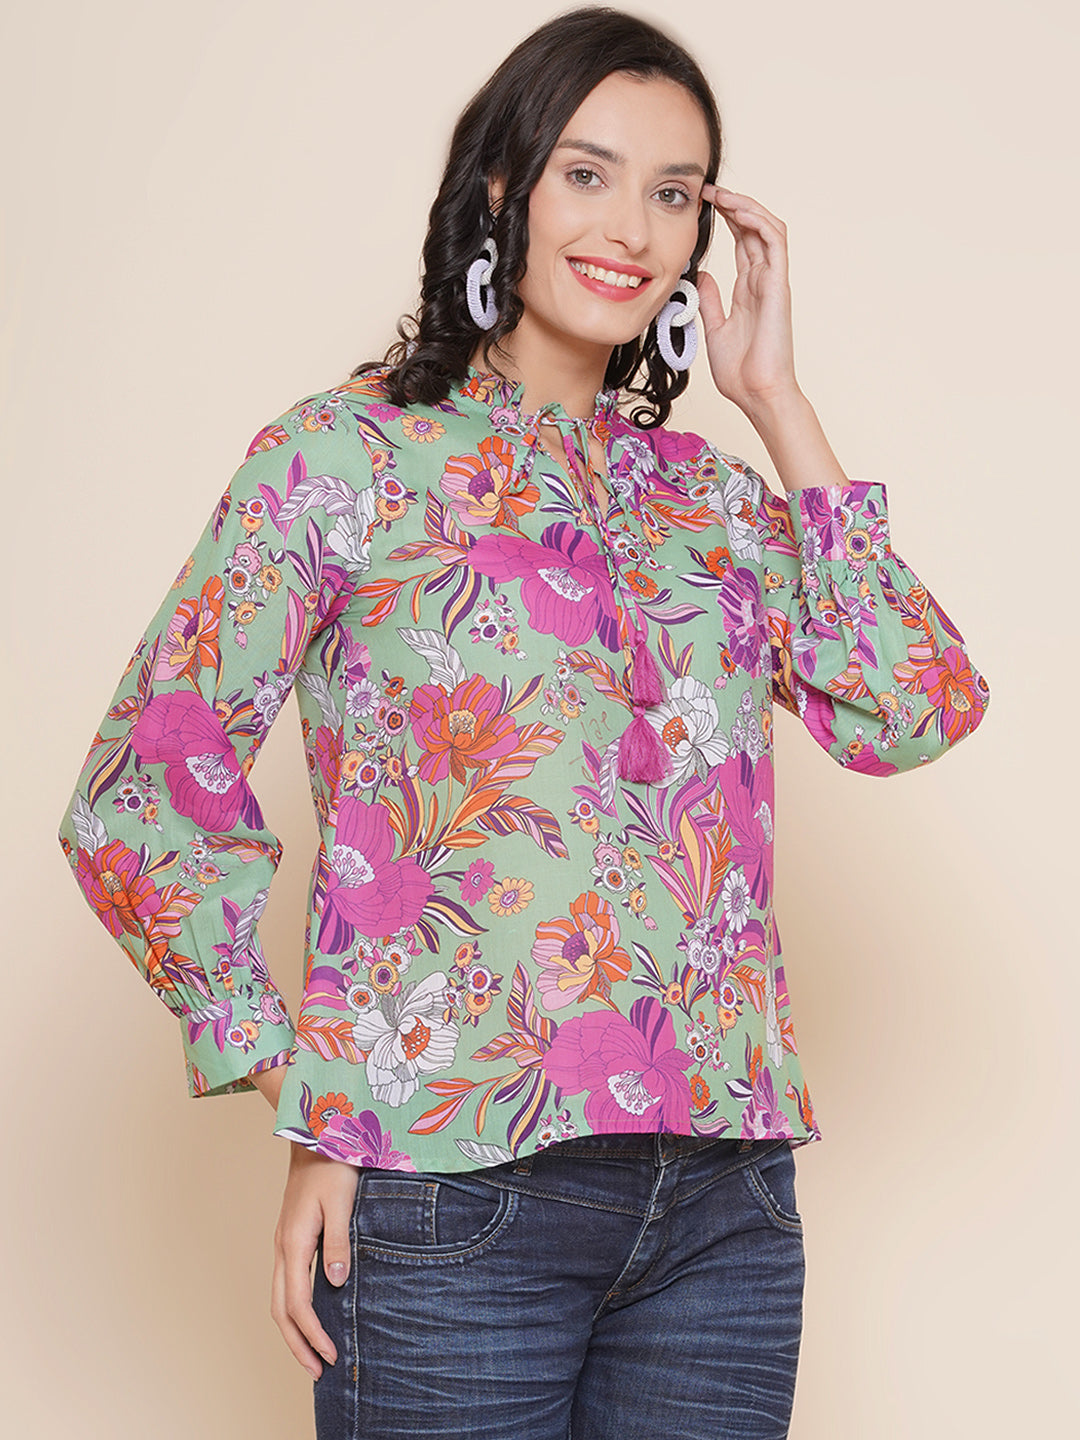 Bhama Couture Green Purple Floral Printed Top